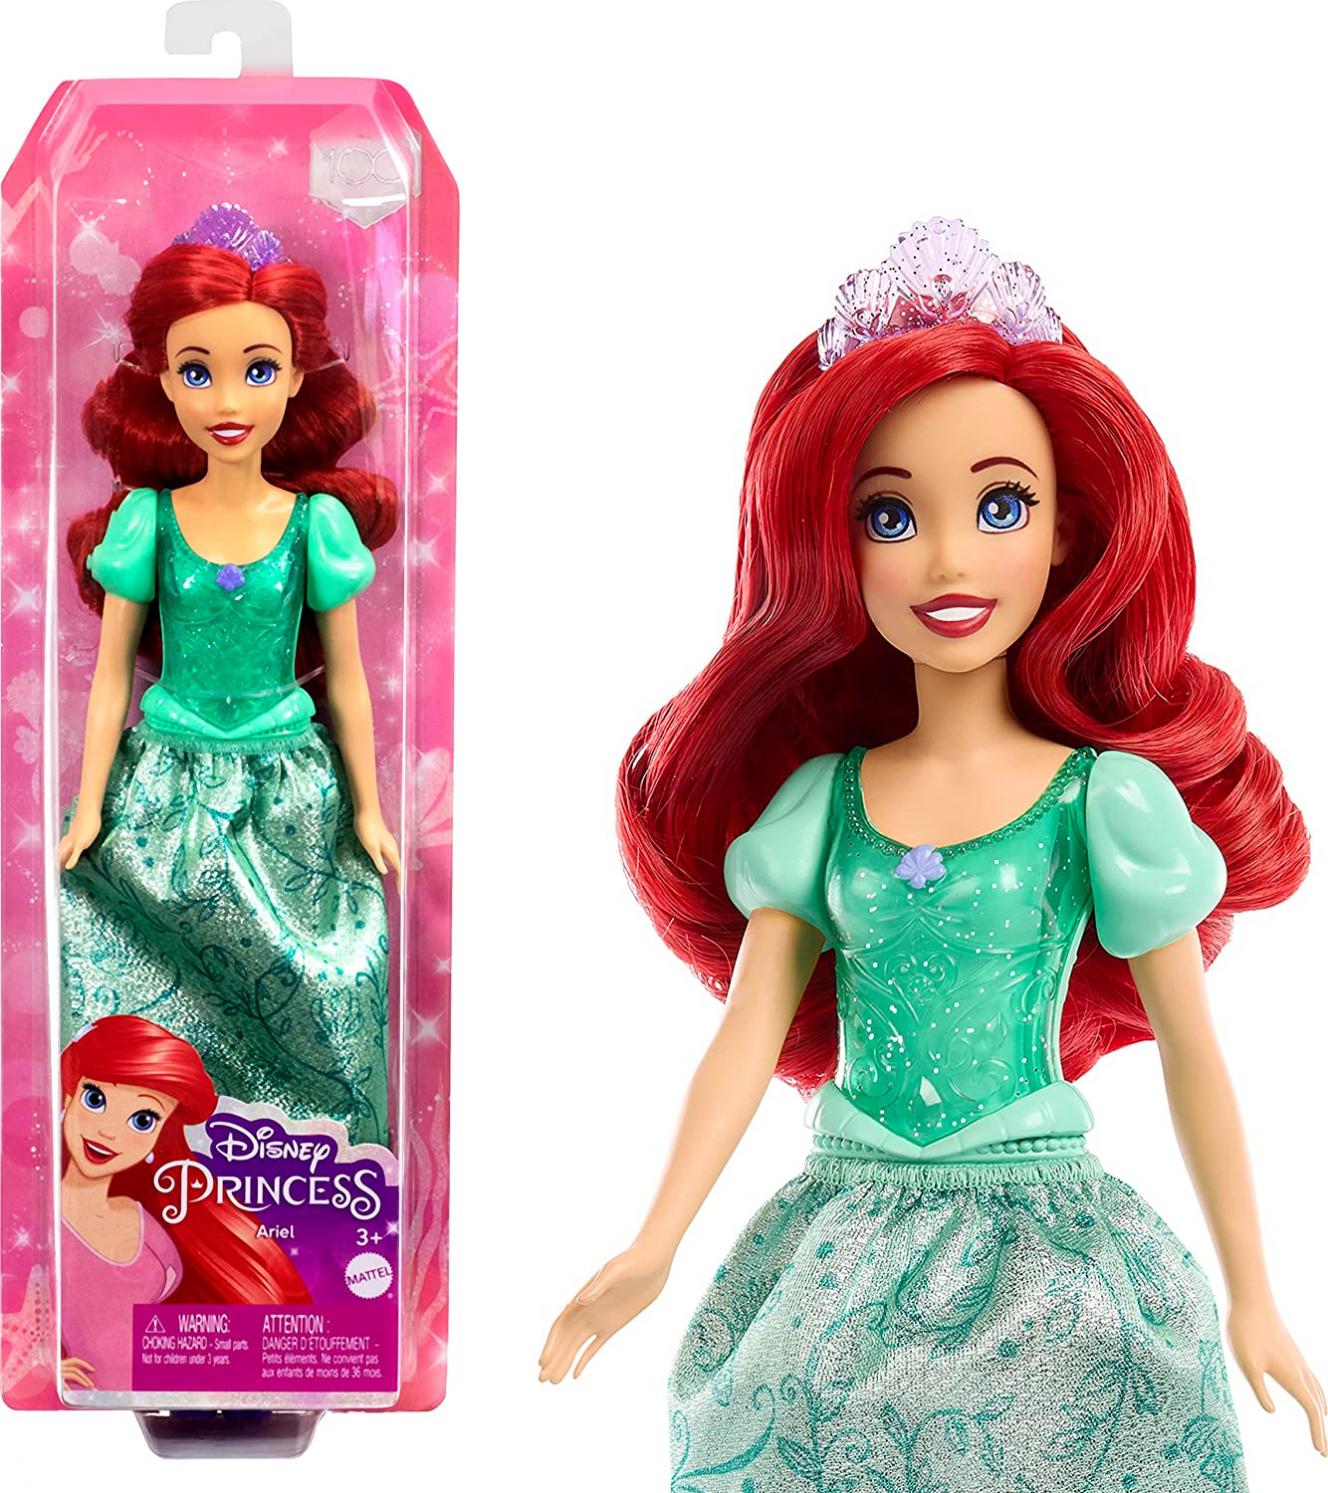 Disney Princess Ariel Fashion Doll, New for 2023, Sparkling Look with Red Hair, Blue Eyes & Tiara Accessory